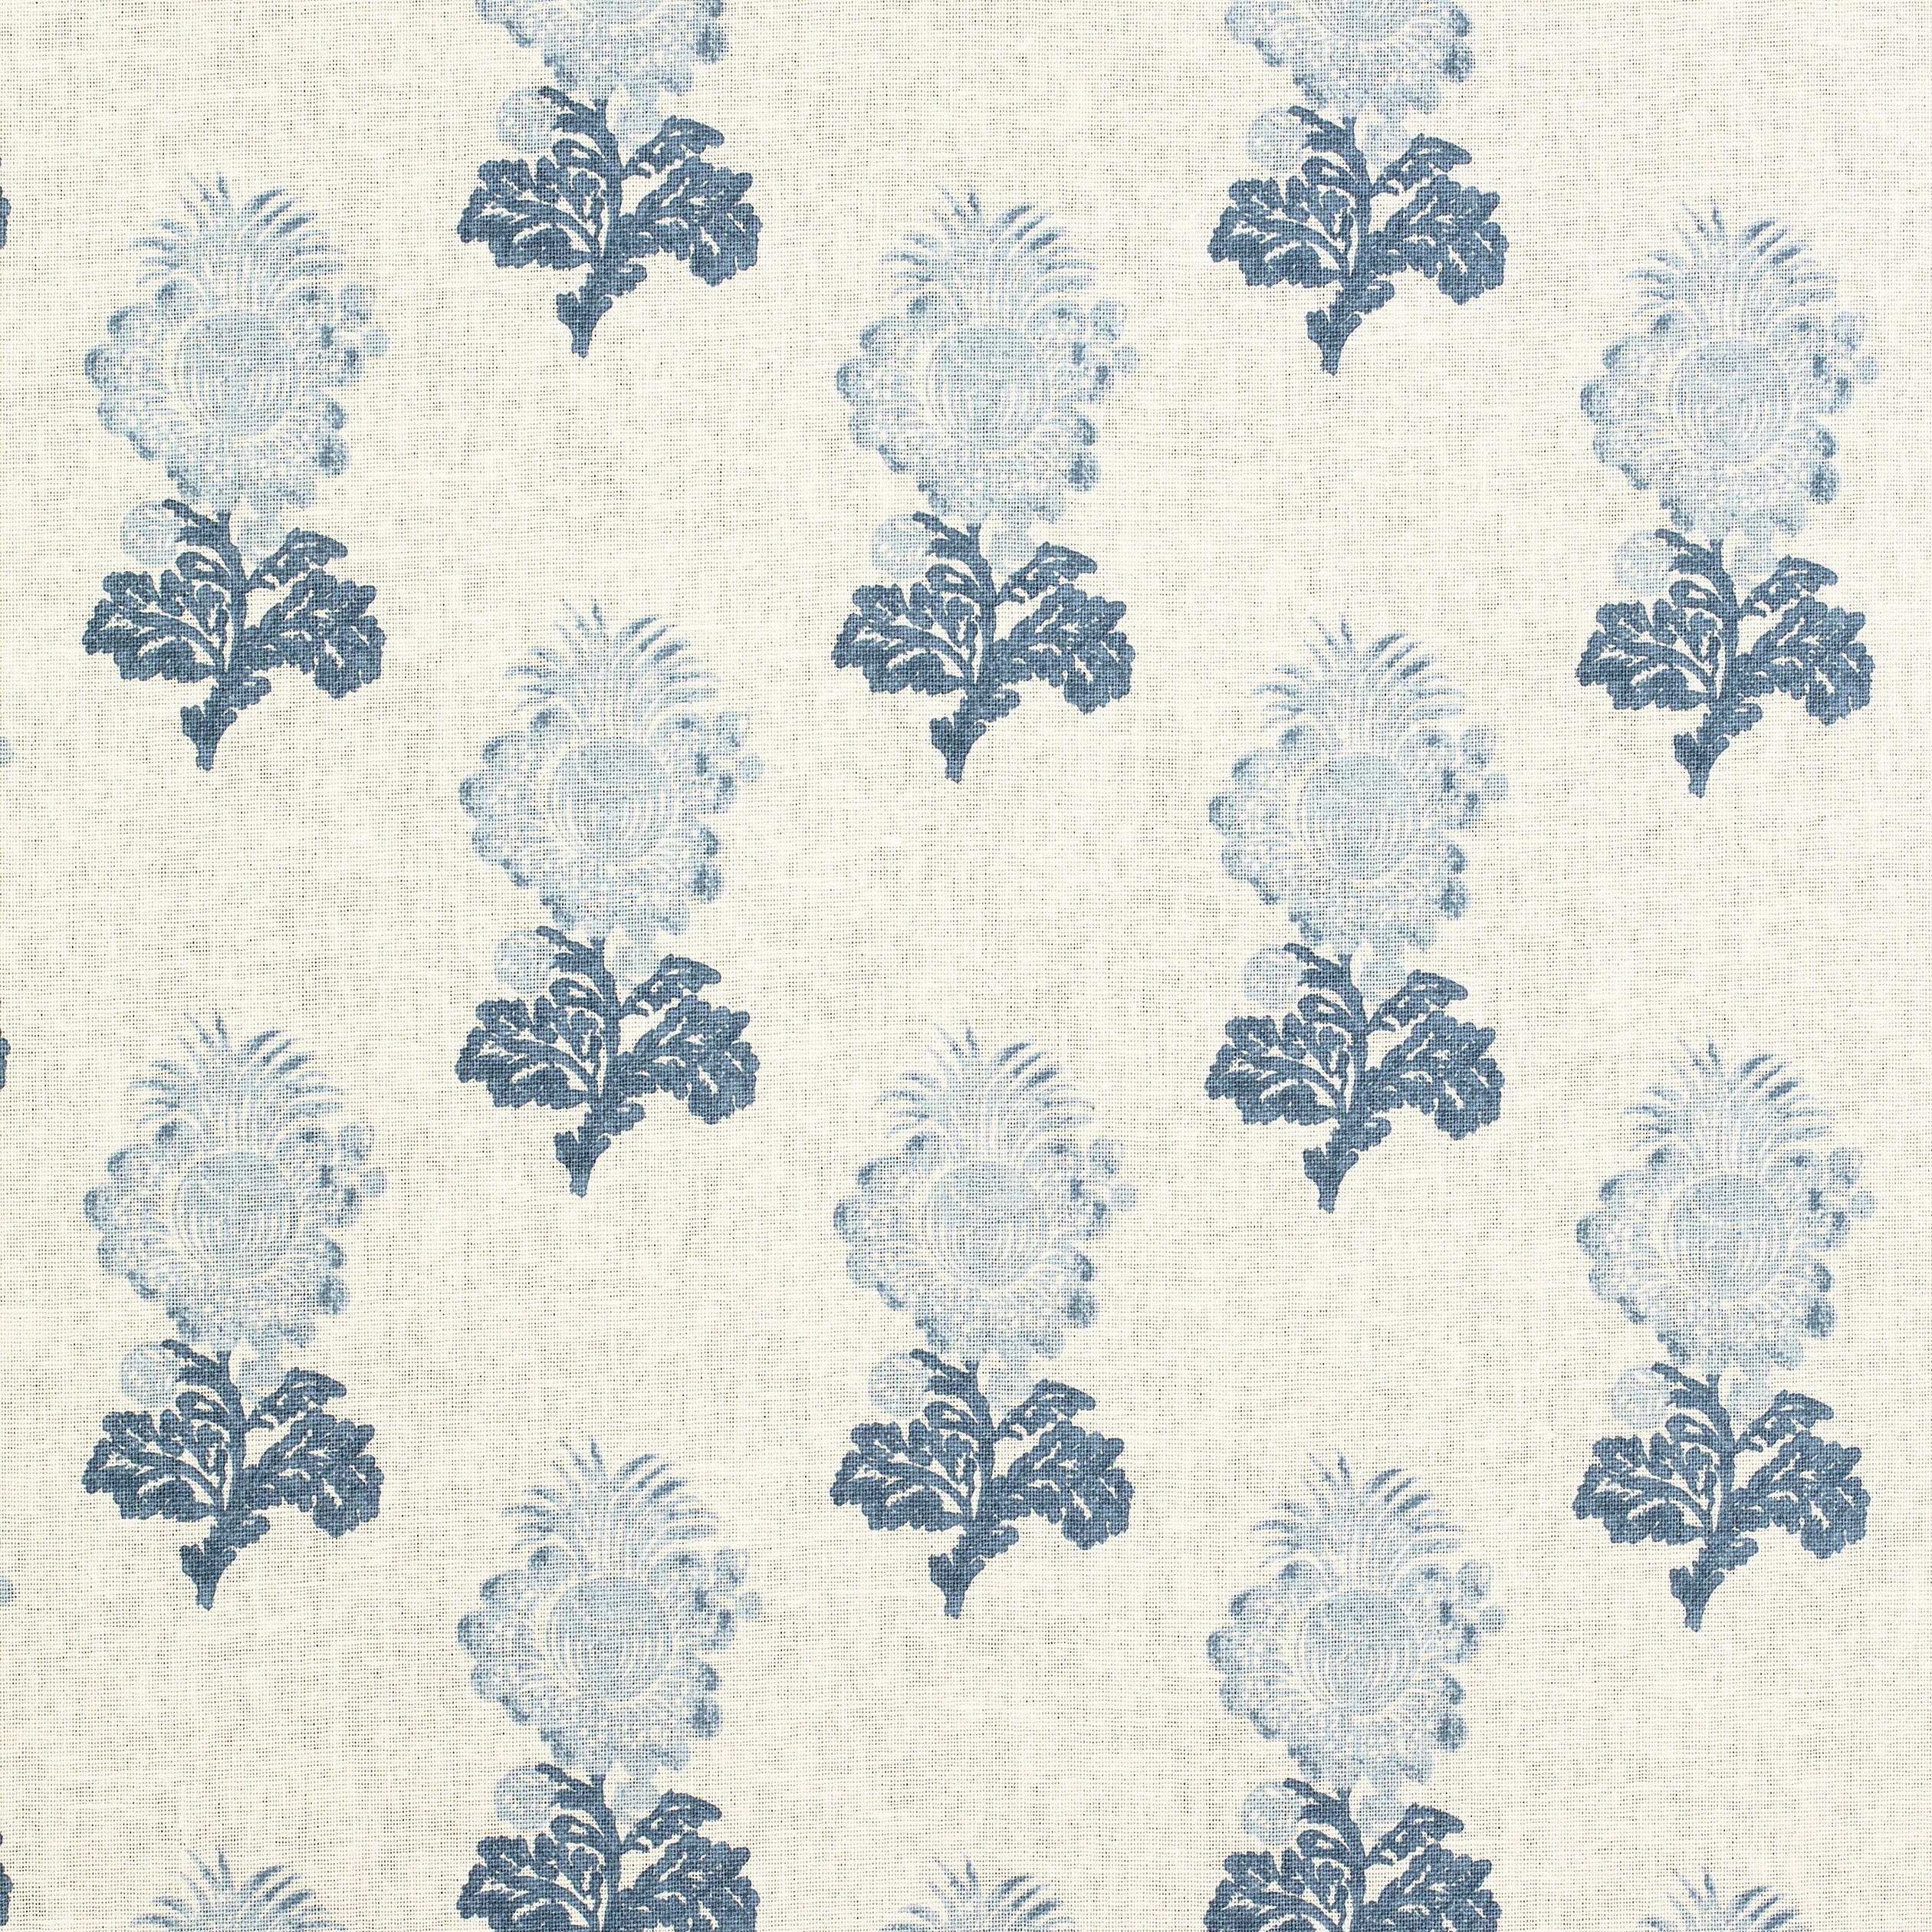 Aldith fabric in blue color - pattern number F972608 - by Thibaut in the Chestnut Hill collection